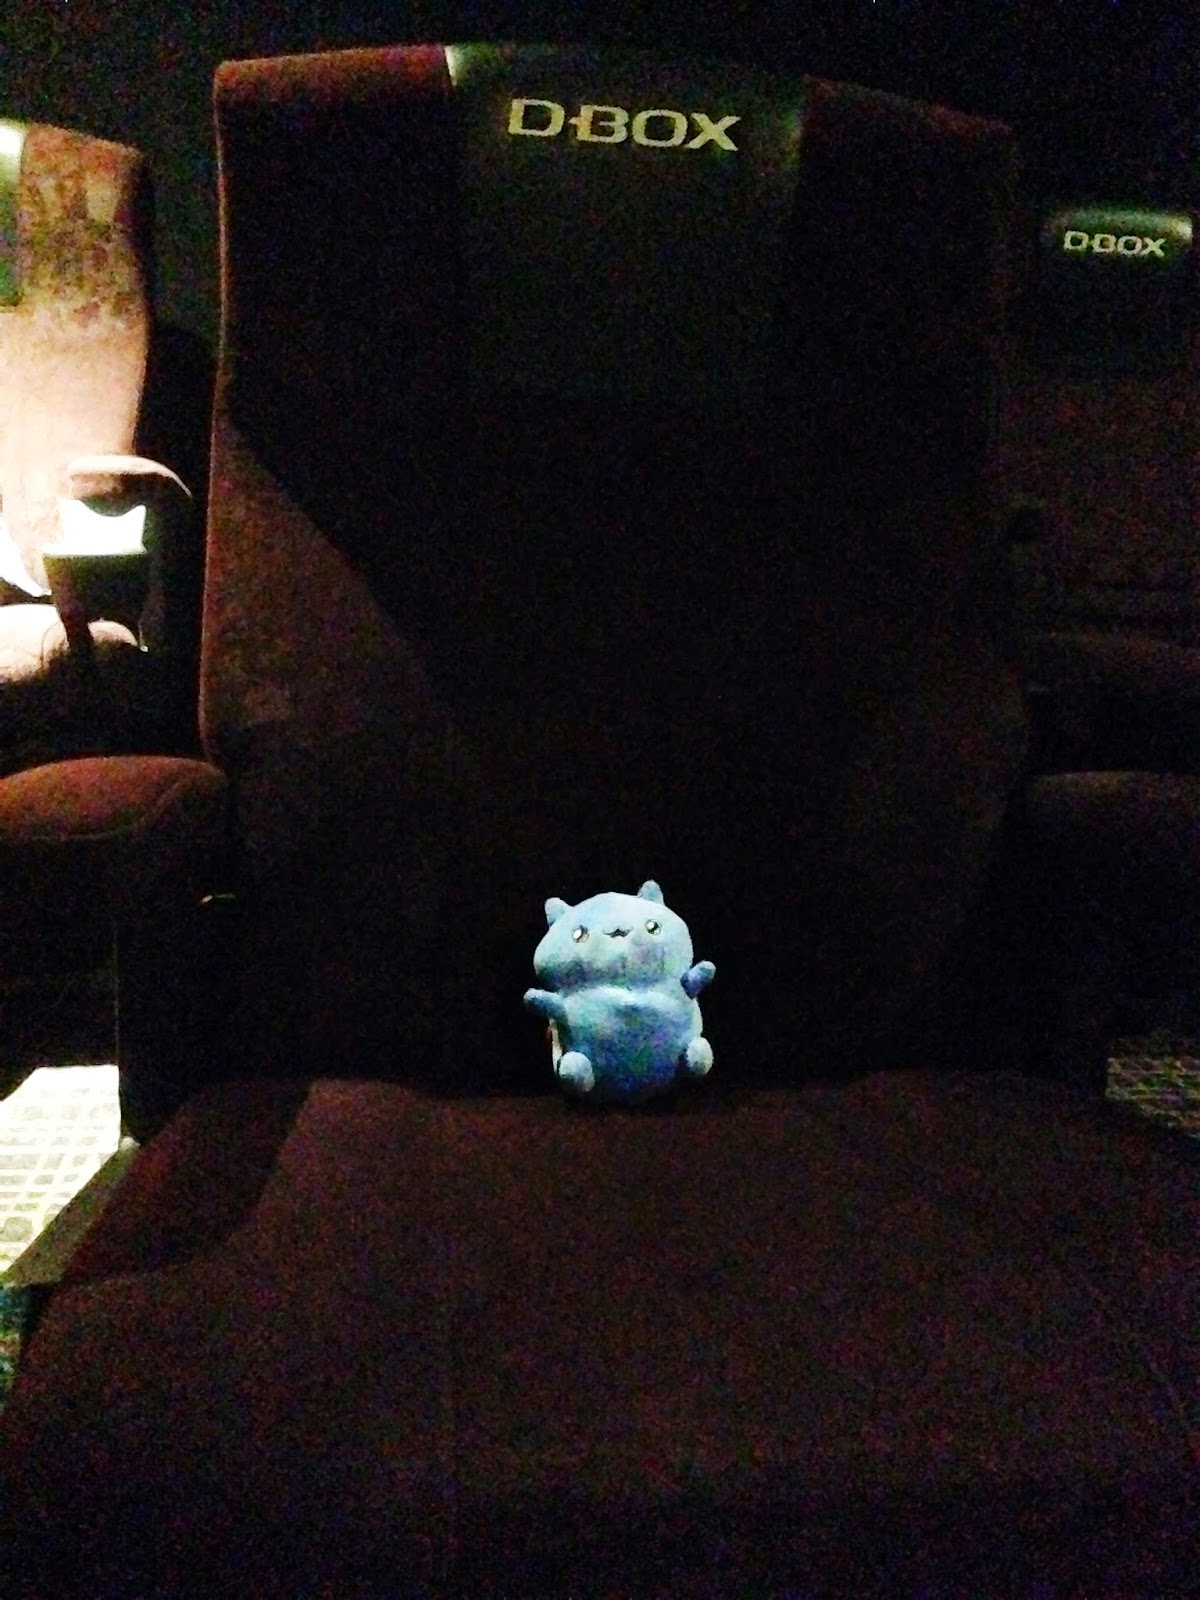 Catbug with D-Box motion seats